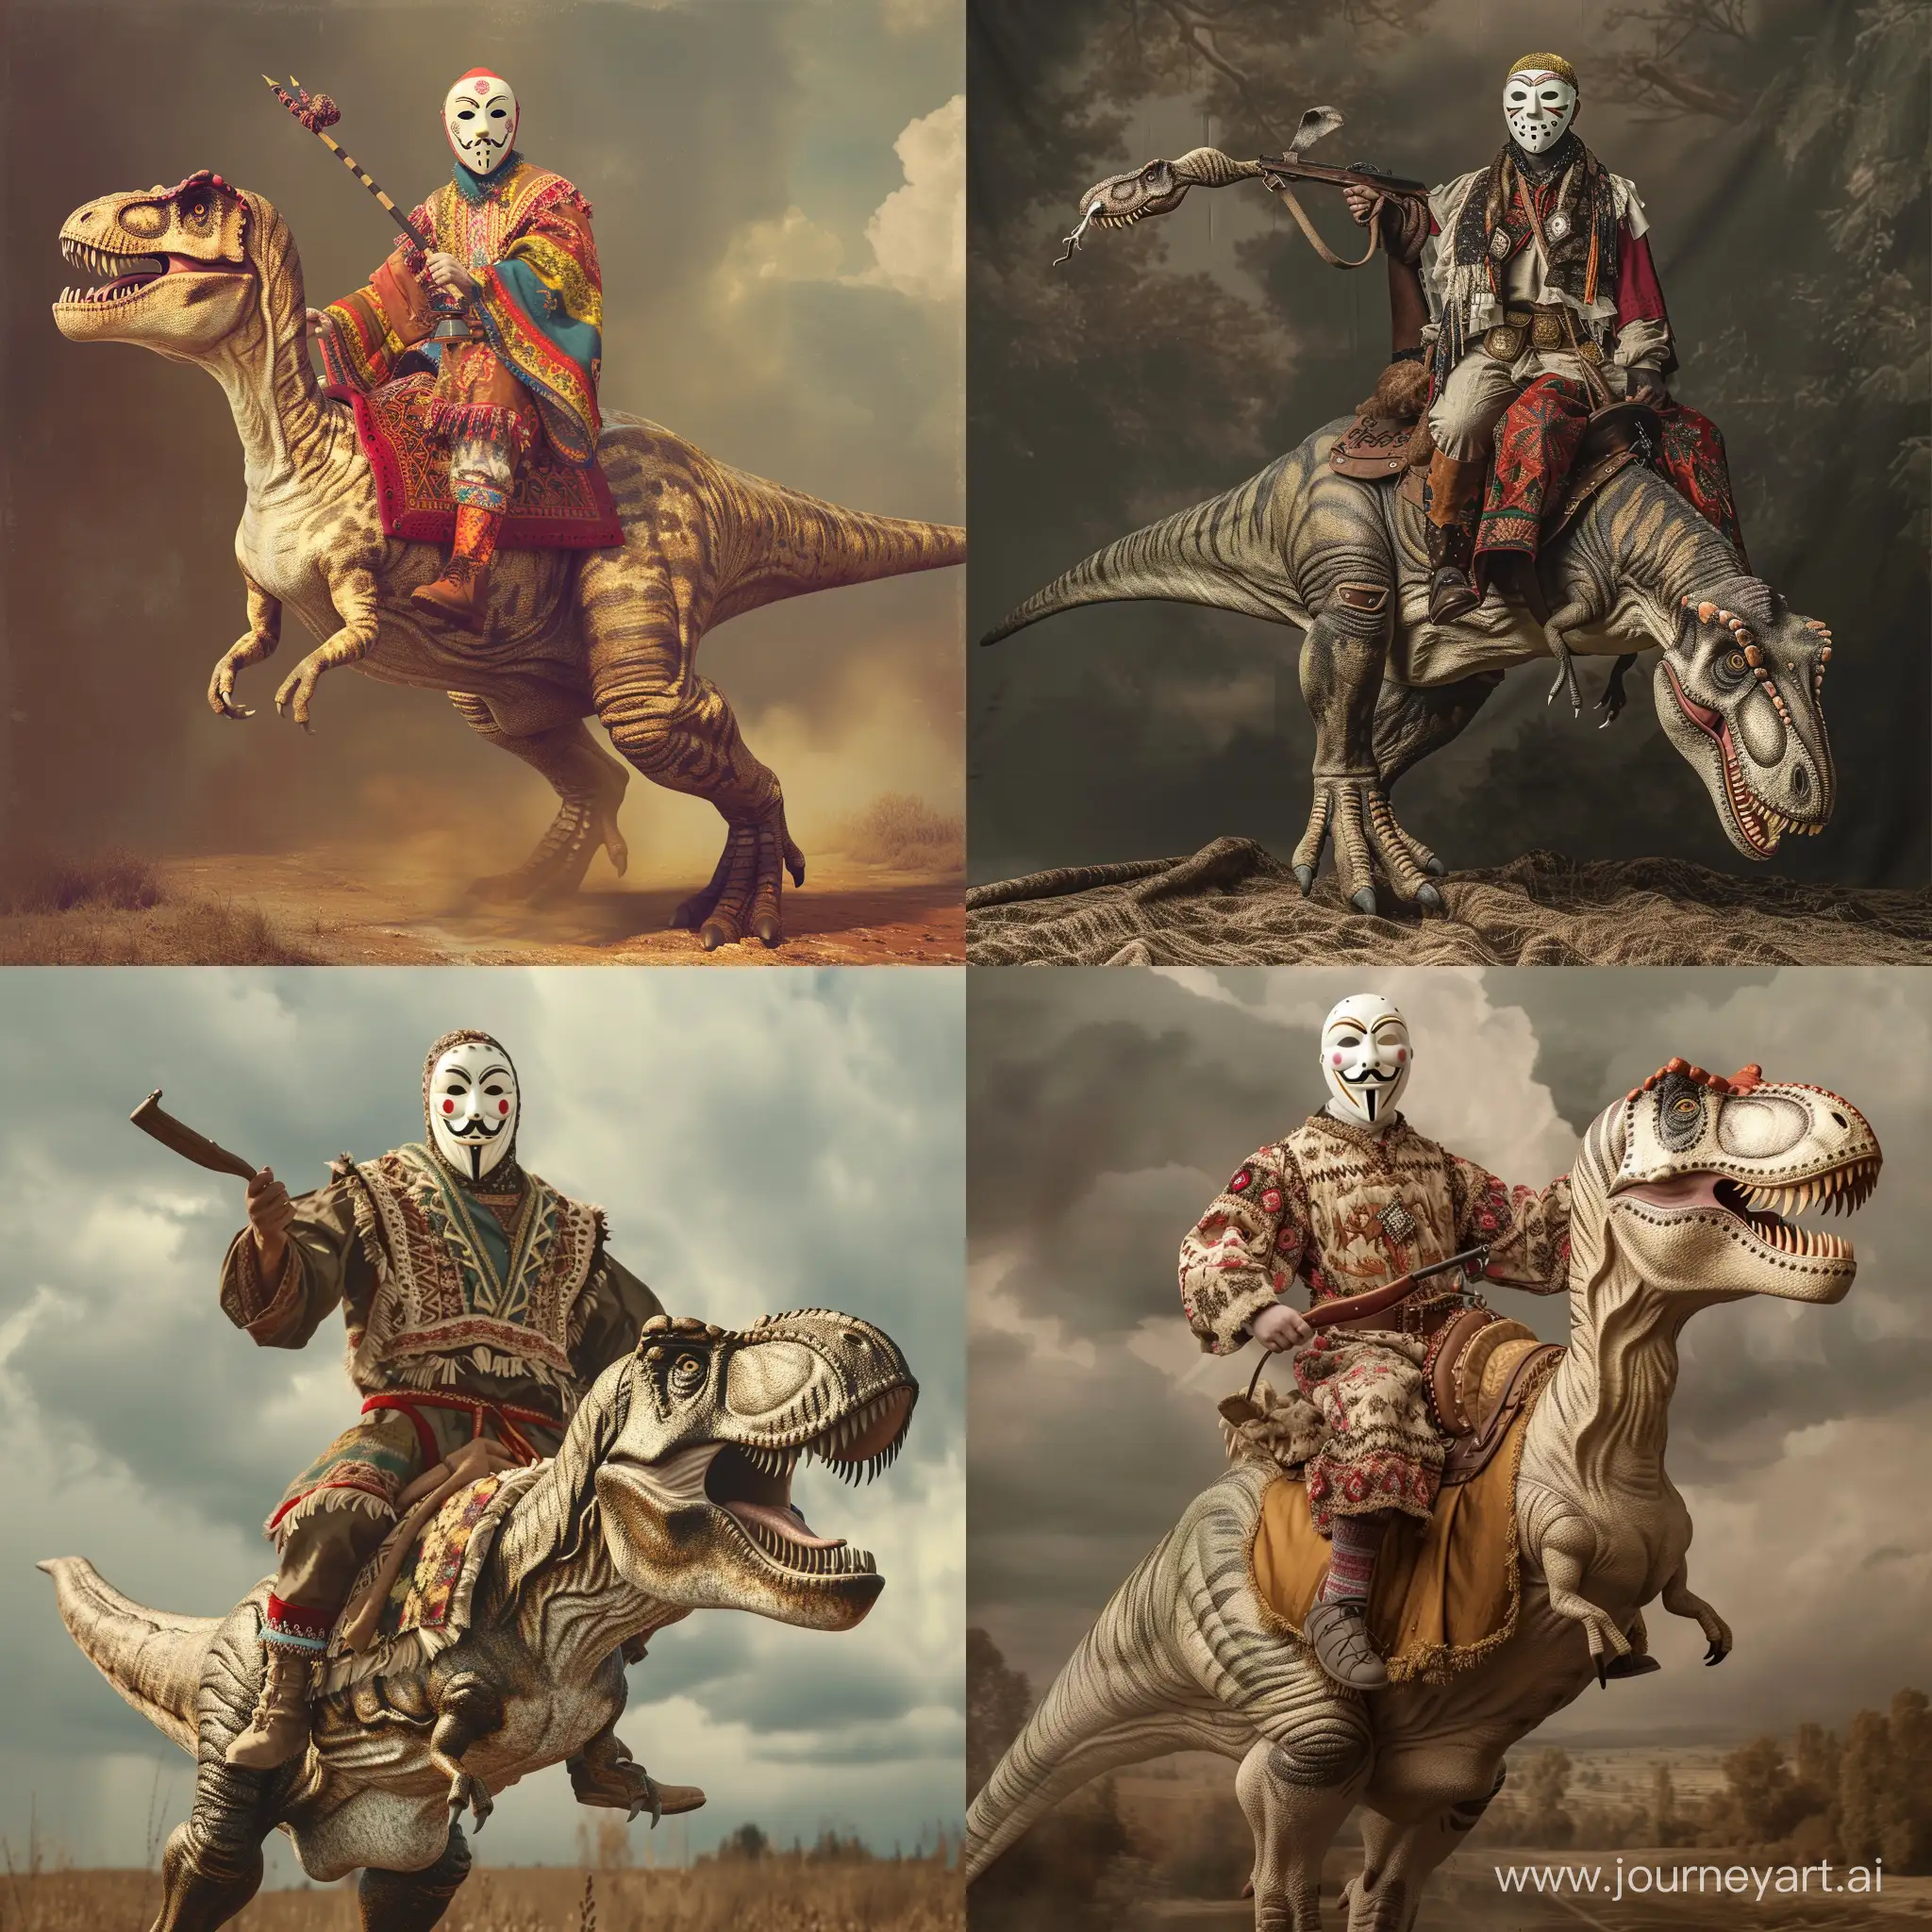 
A man in an anonymous mask in a Slavic folk costume riding a tyrannosaurus rex